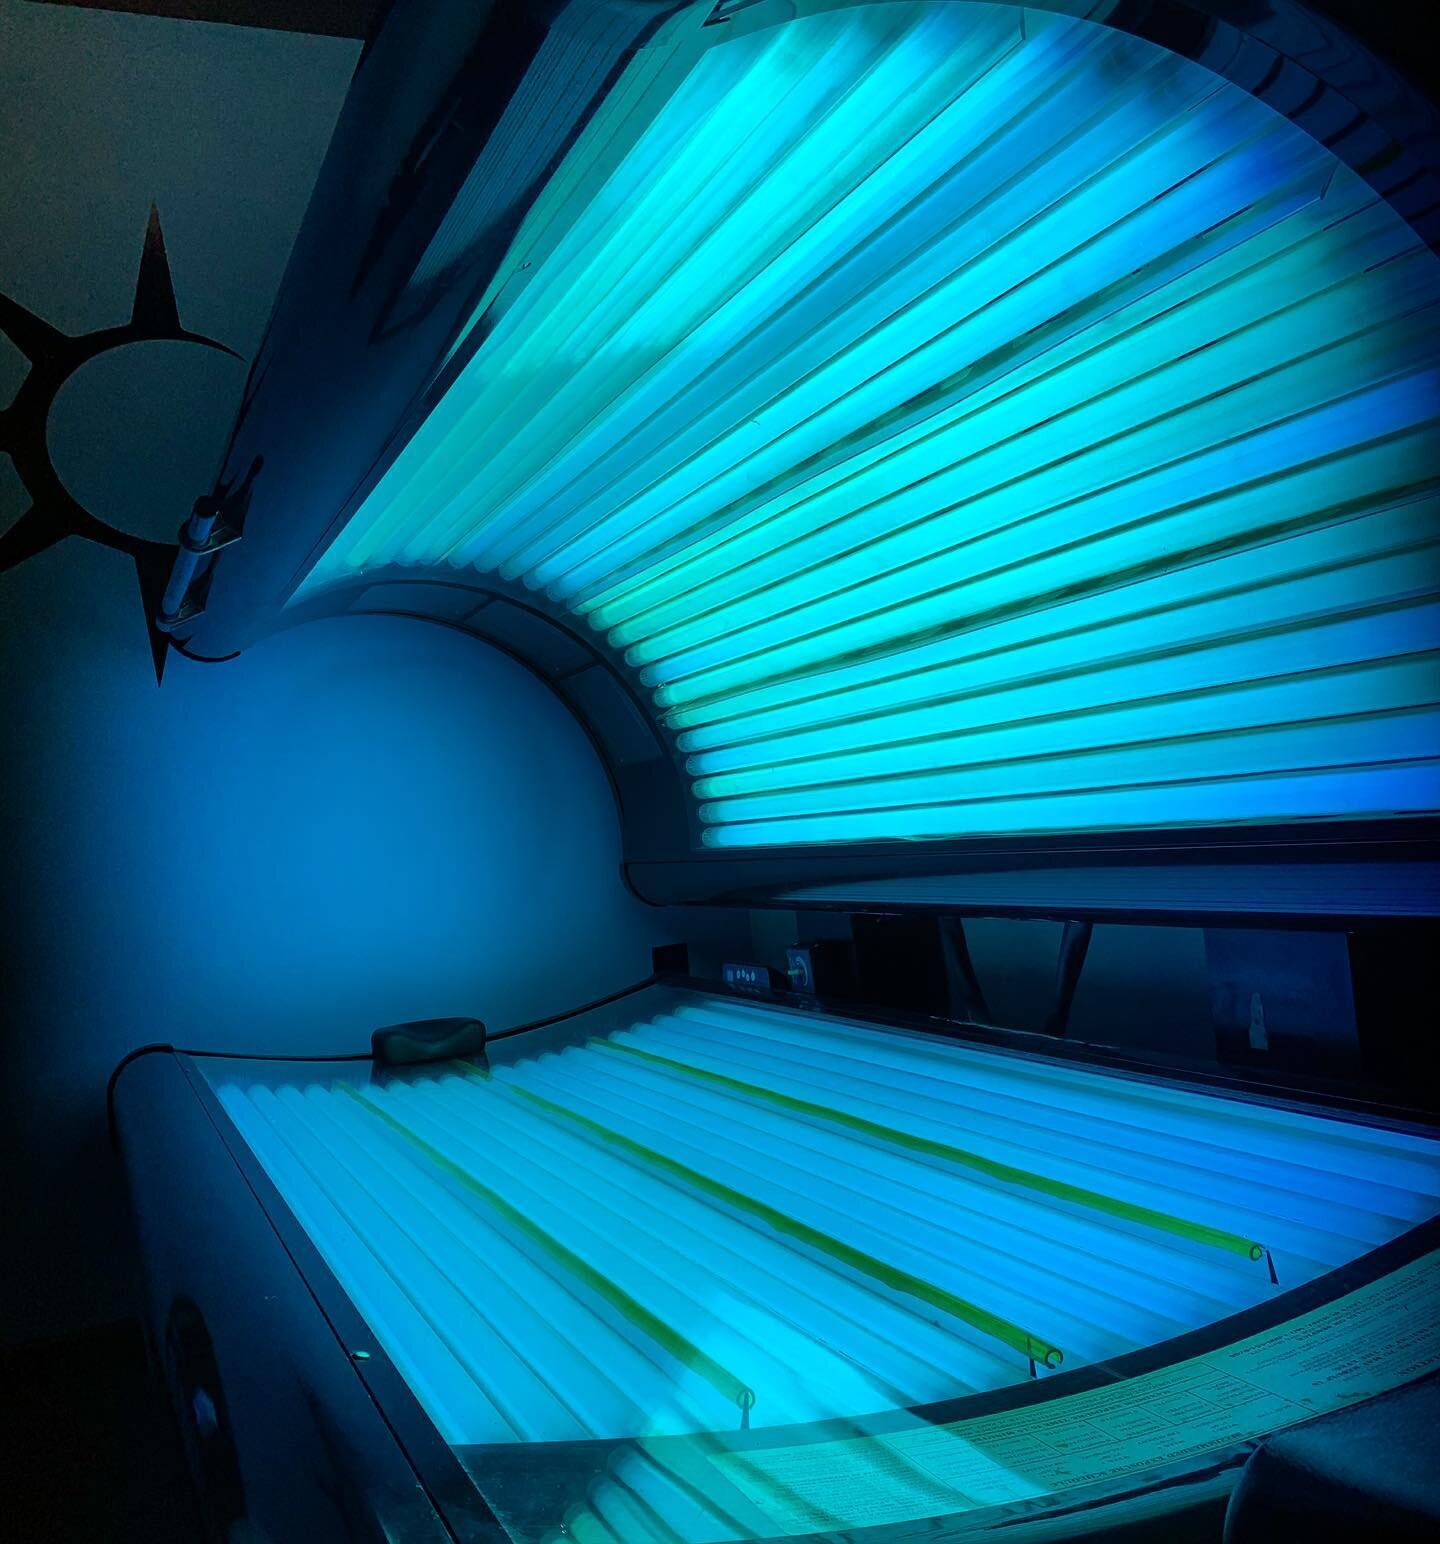 NEW BULBS are in 😎👍
☀️ - Lay Down &amp; Stand Up Options 
☀️ - Discounted Gym Member Tanning
☀️ - Non Member Tanning Available 
☀️ - Day Passes
☀️ - Bottles, Packets, &amp; Goggles Available
- 
Come get a jump start on spring and your summer vacati